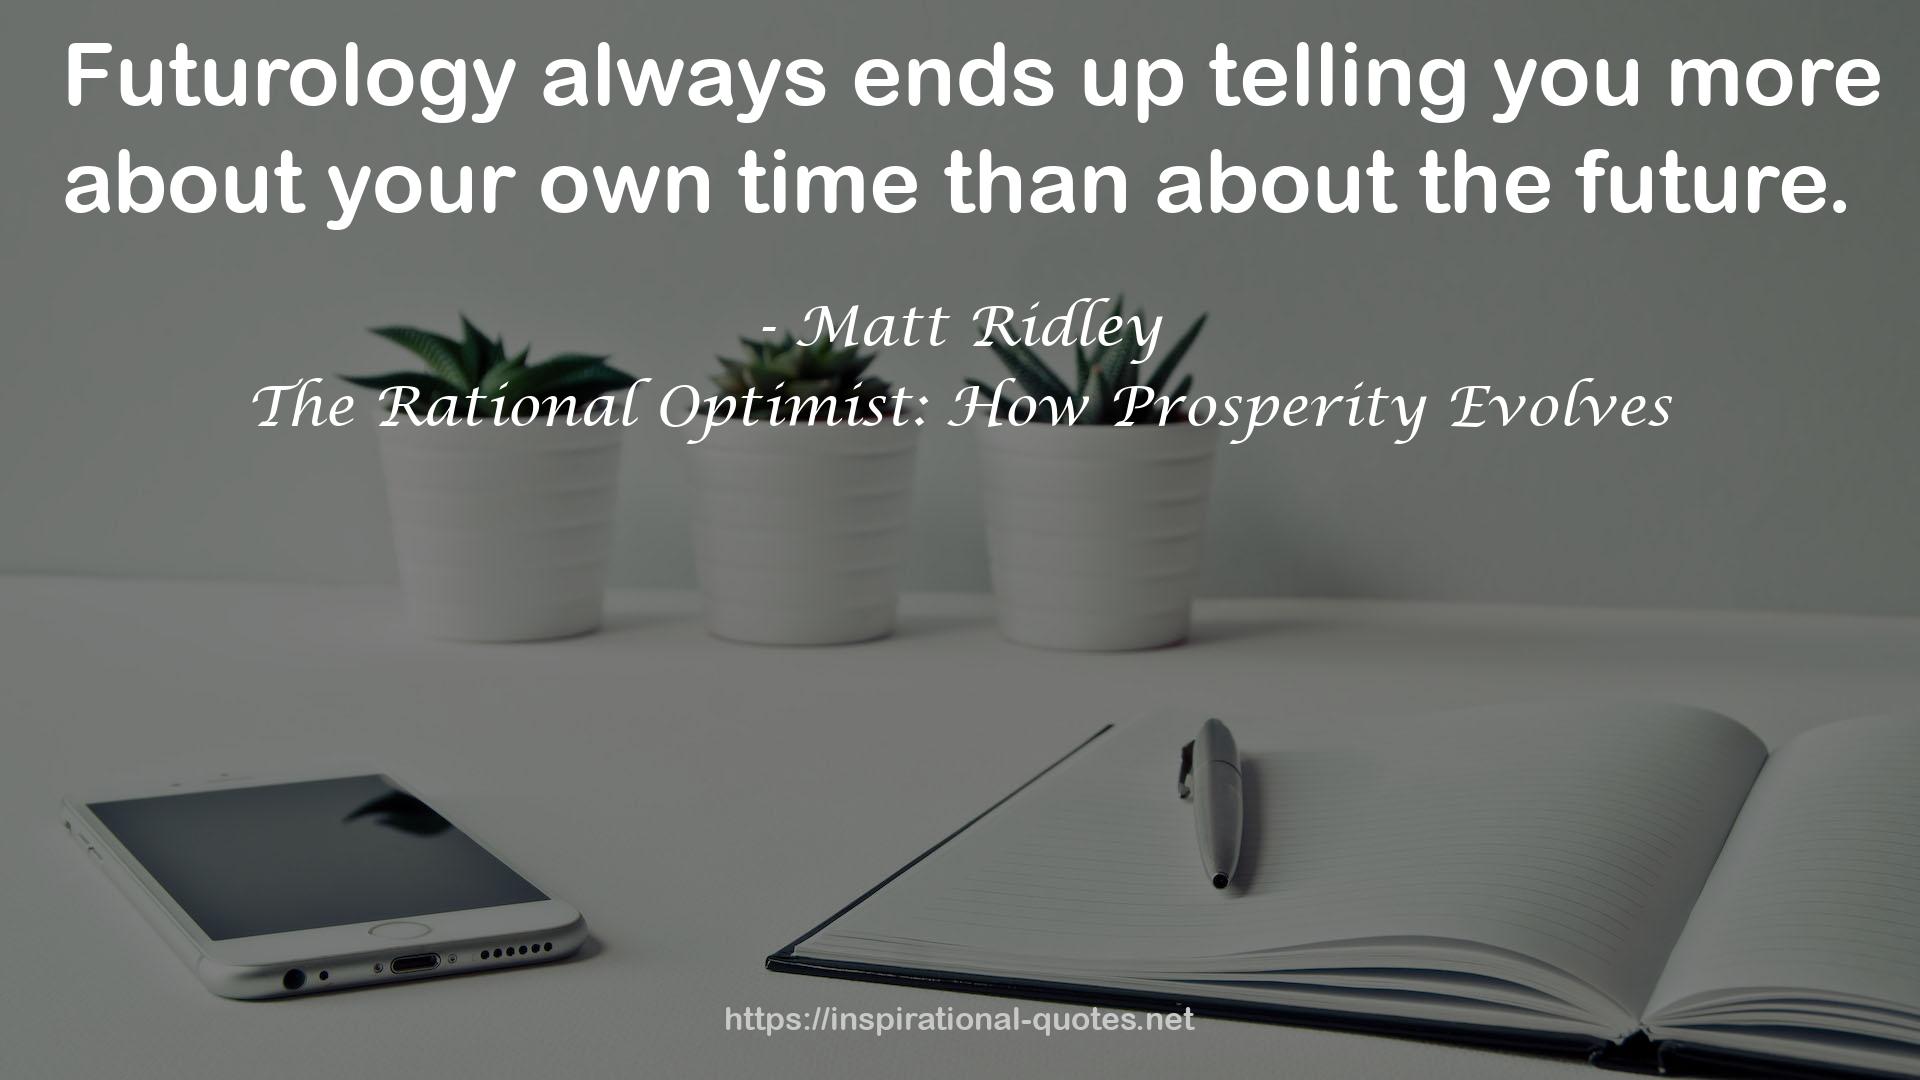 The Rational Optimist: How Prosperity Evolves QUOTES